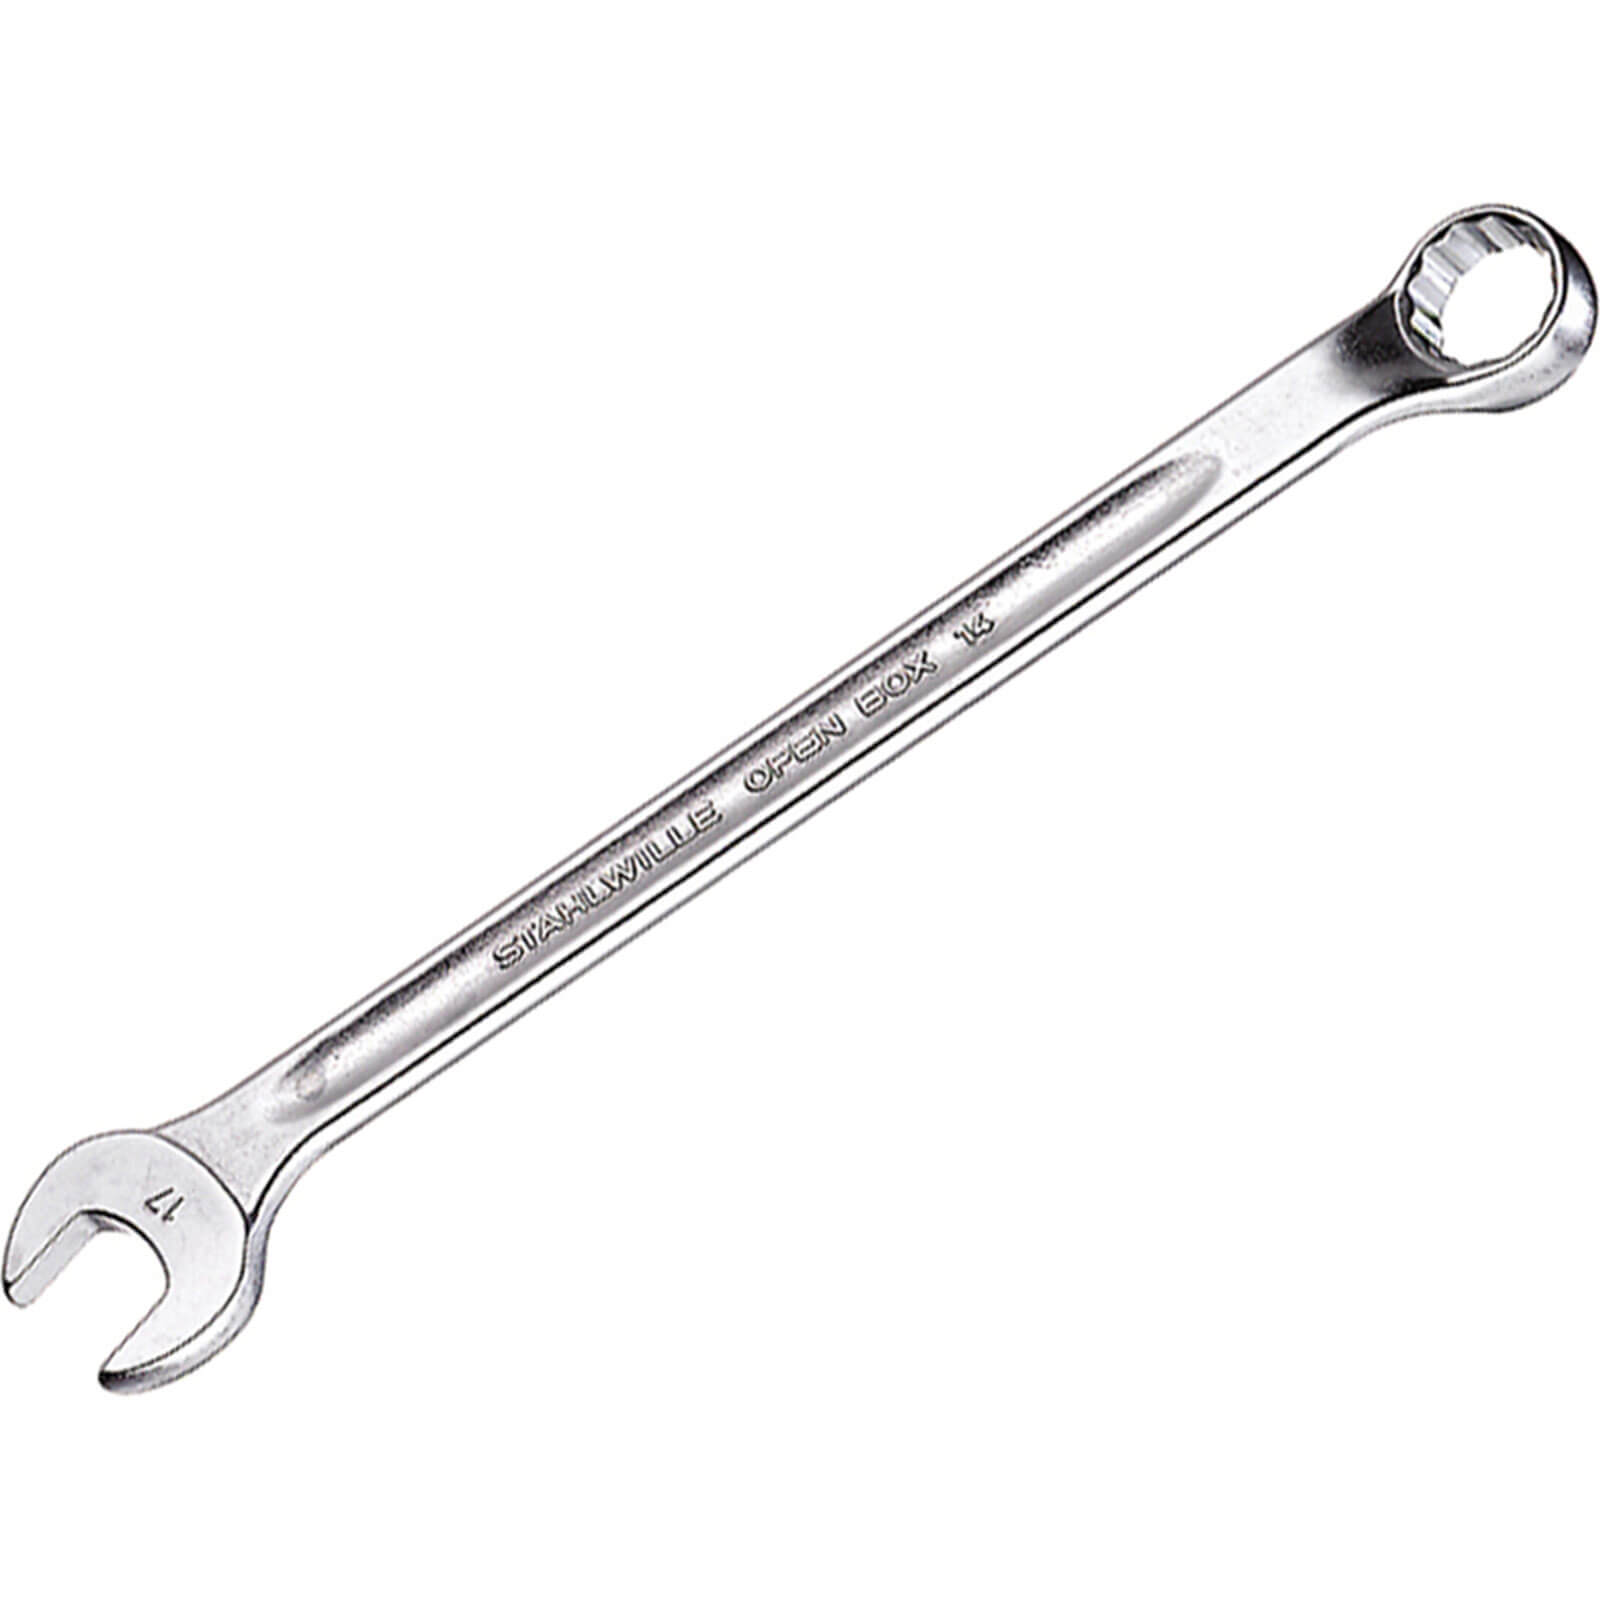 Image of Stahlwille Long Series Combination Spanner 16mm